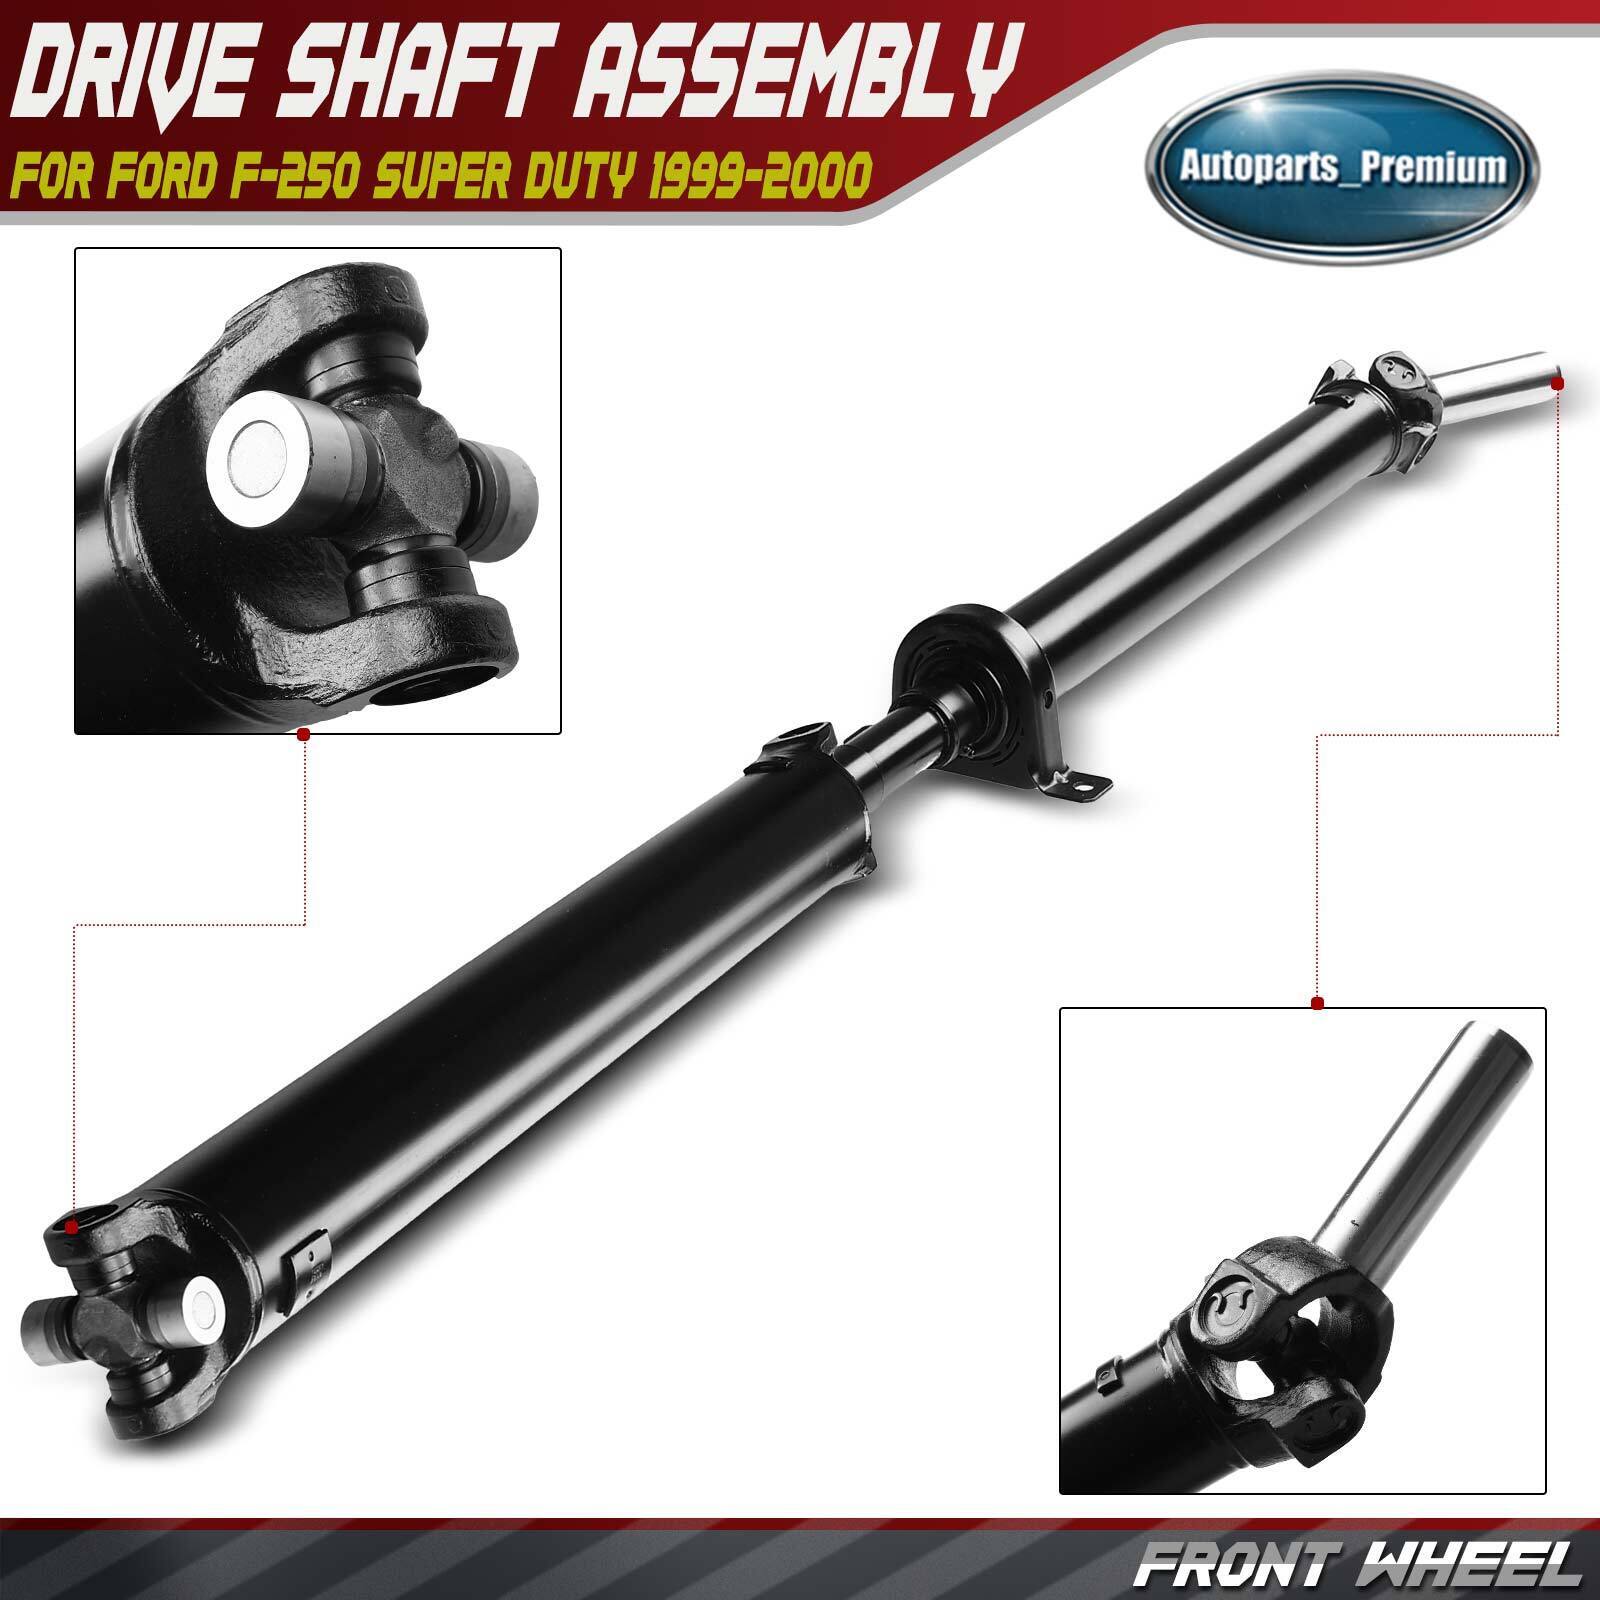 Rear Drive Shaft Assembly for Ford F-250 F-350 Super Duty XL only 99-01 5.4L RWD